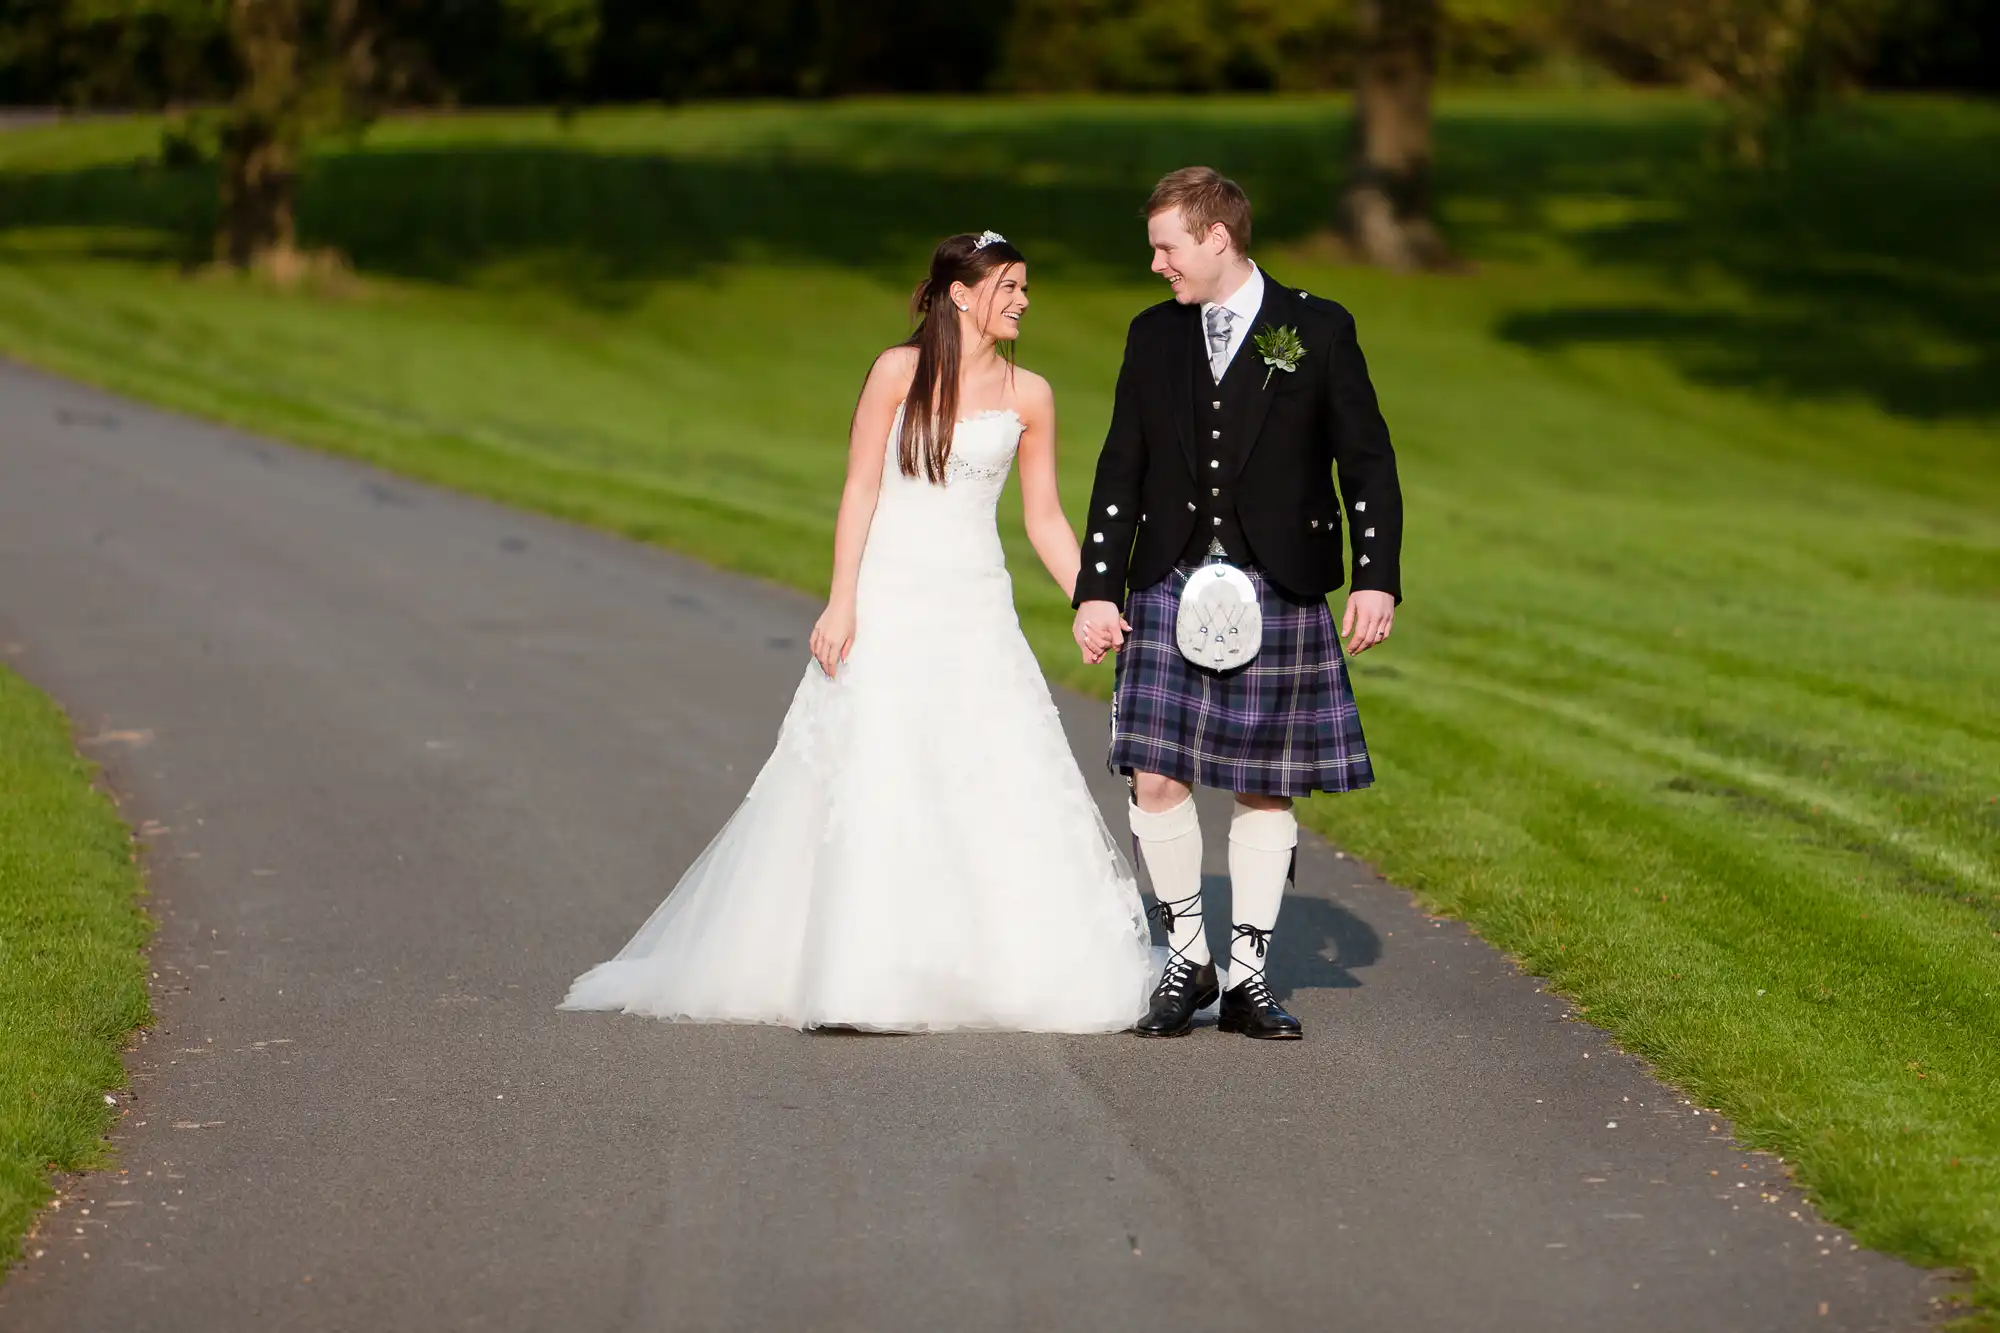 A bride in a white dress and a groom in a kilt walking and smiling at each other on a sunlit park pathway.